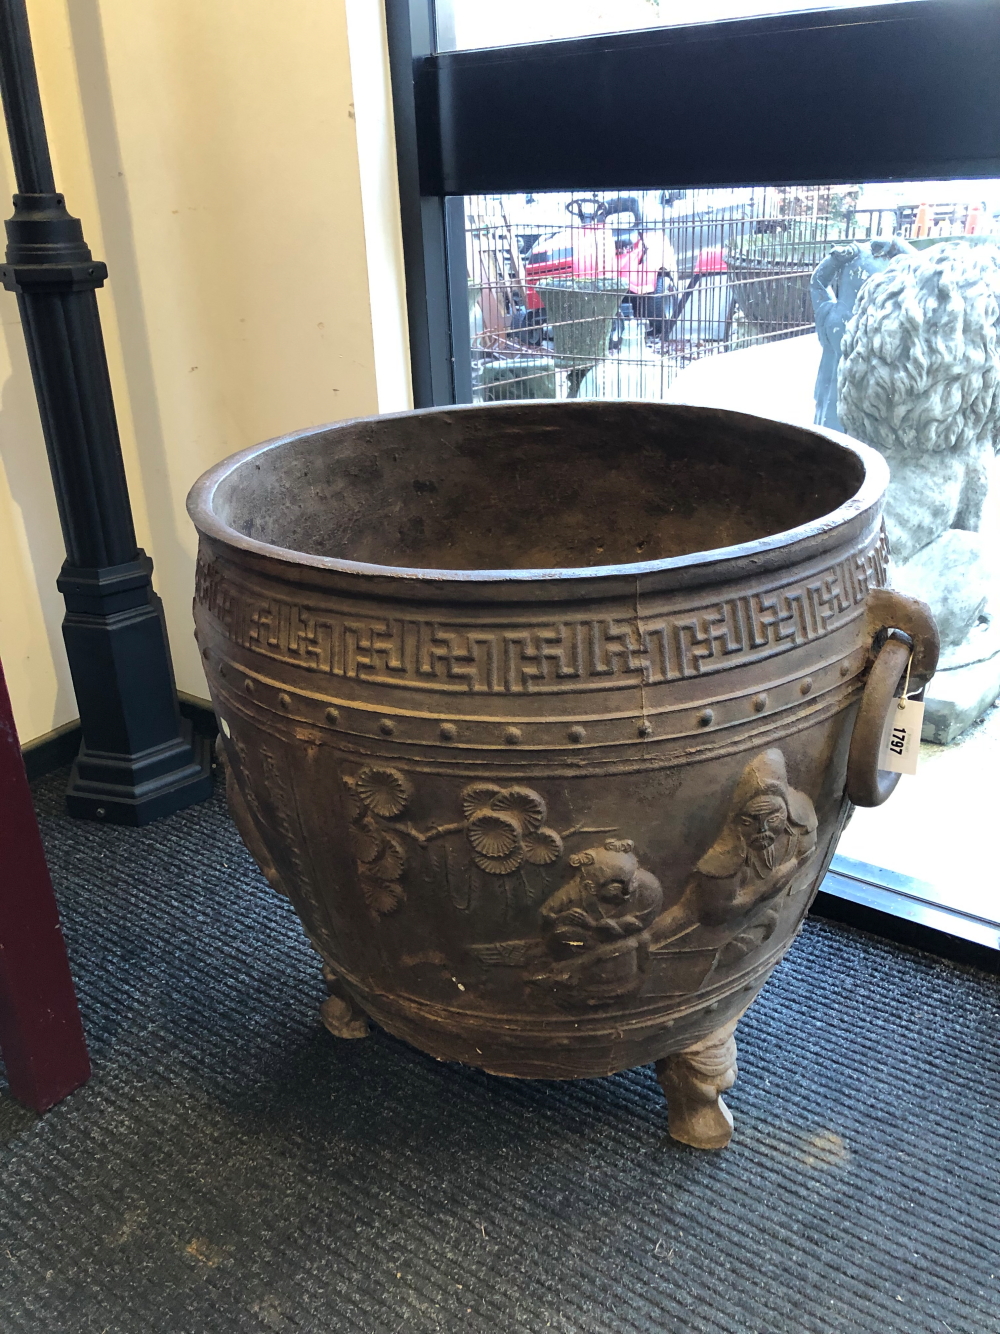 A CHINESE CAST IRON RING HANDLED CAULDRON, THE ROUNDED SIDES CAST WITH FIGURES AND INSCRIPTIONS - Image 6 of 9